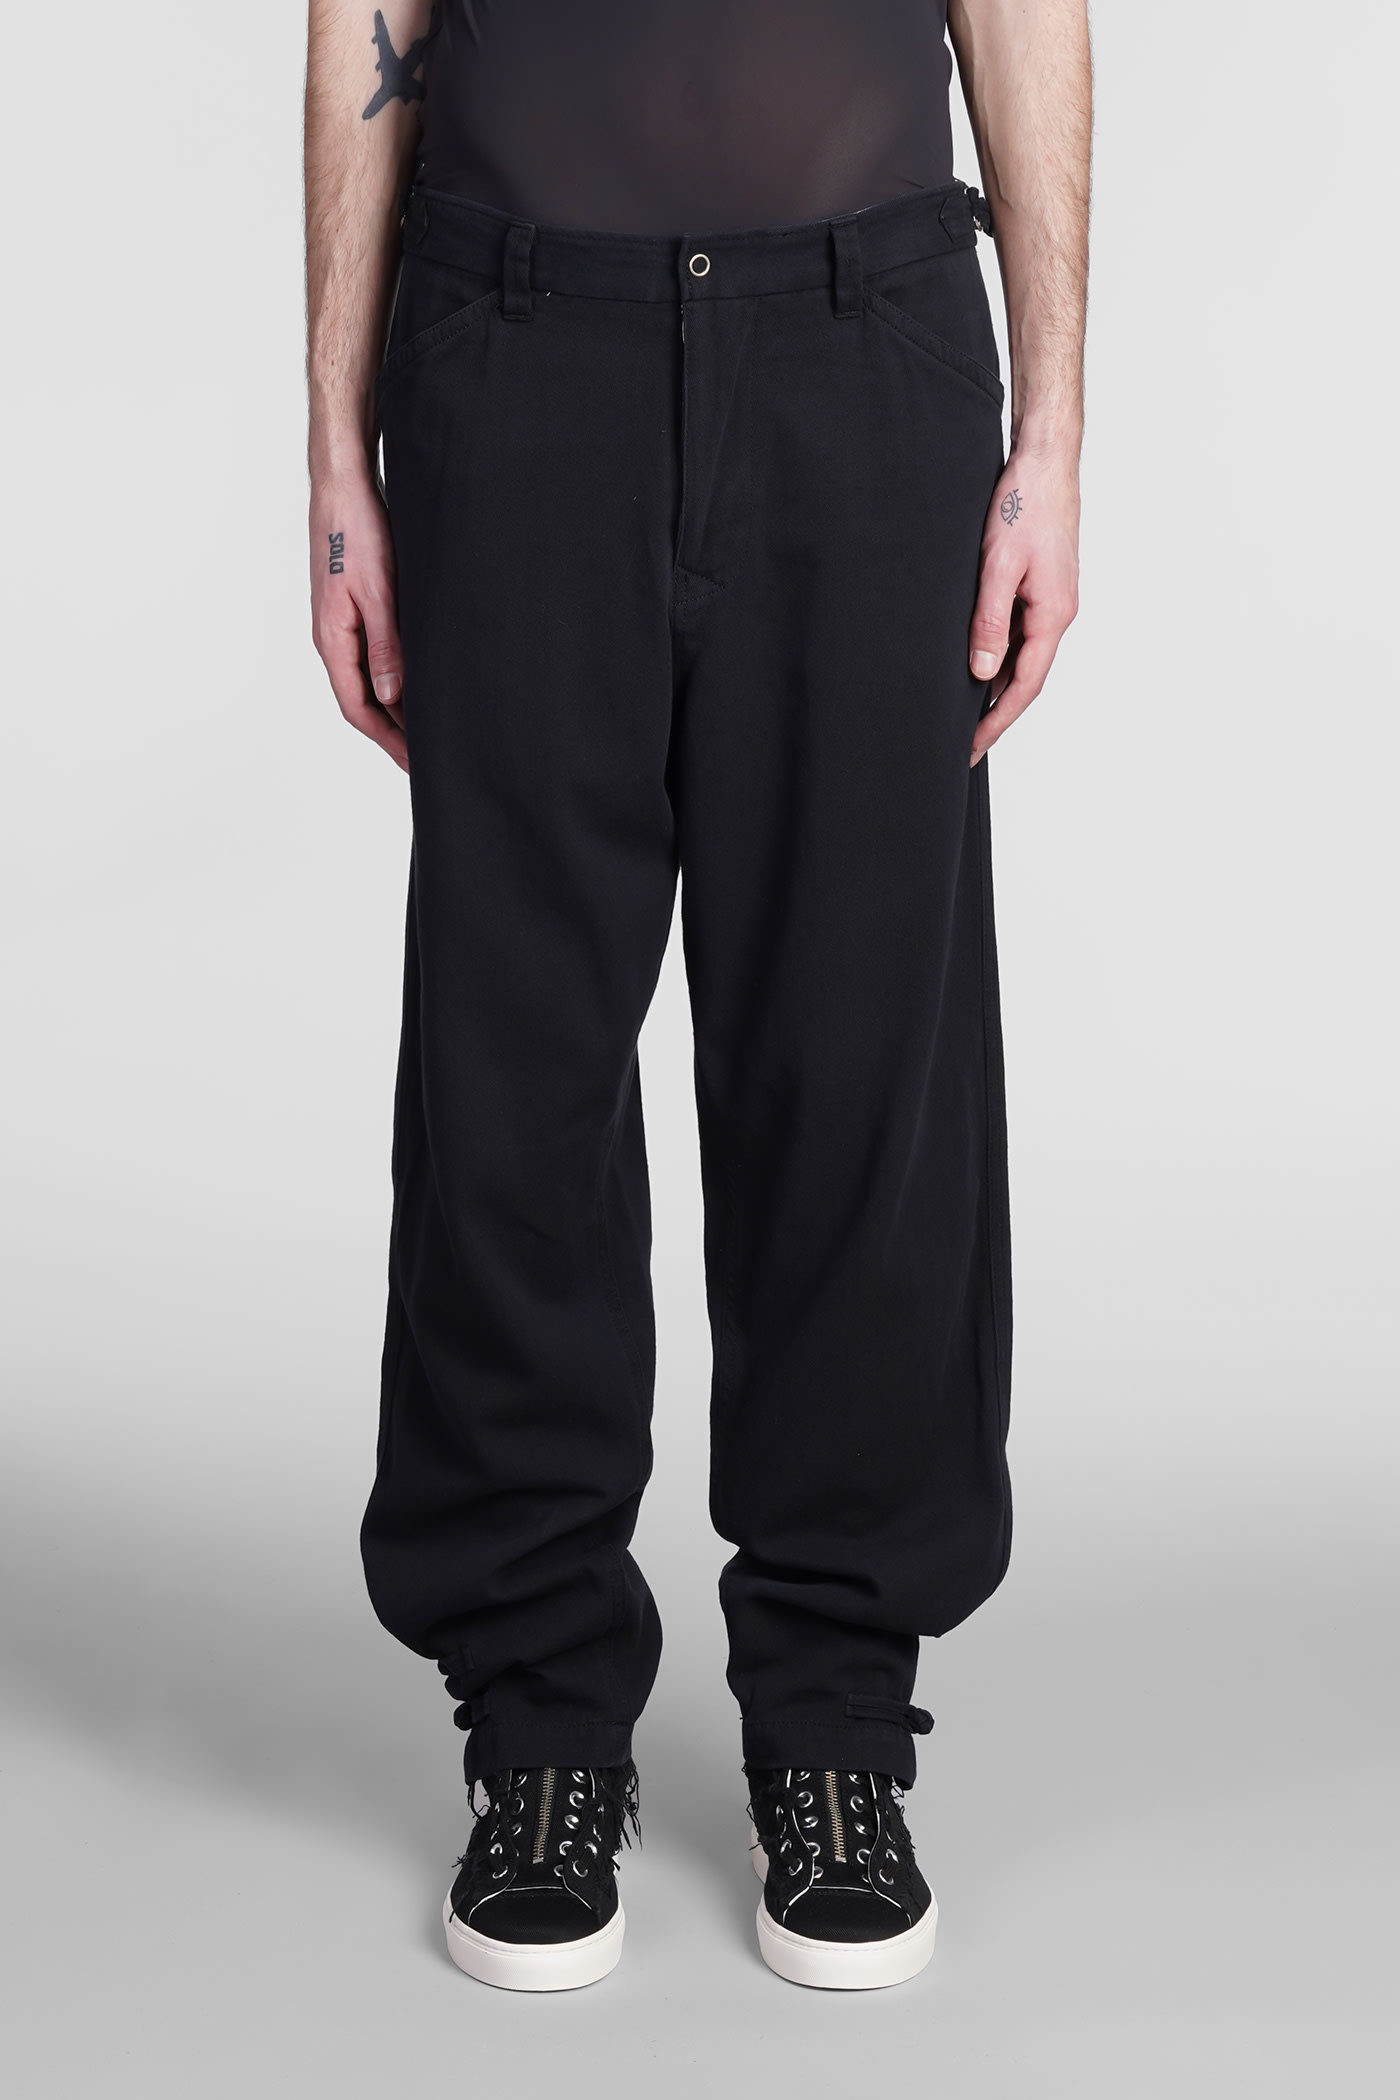 Undercover Trousers In Black Cotton